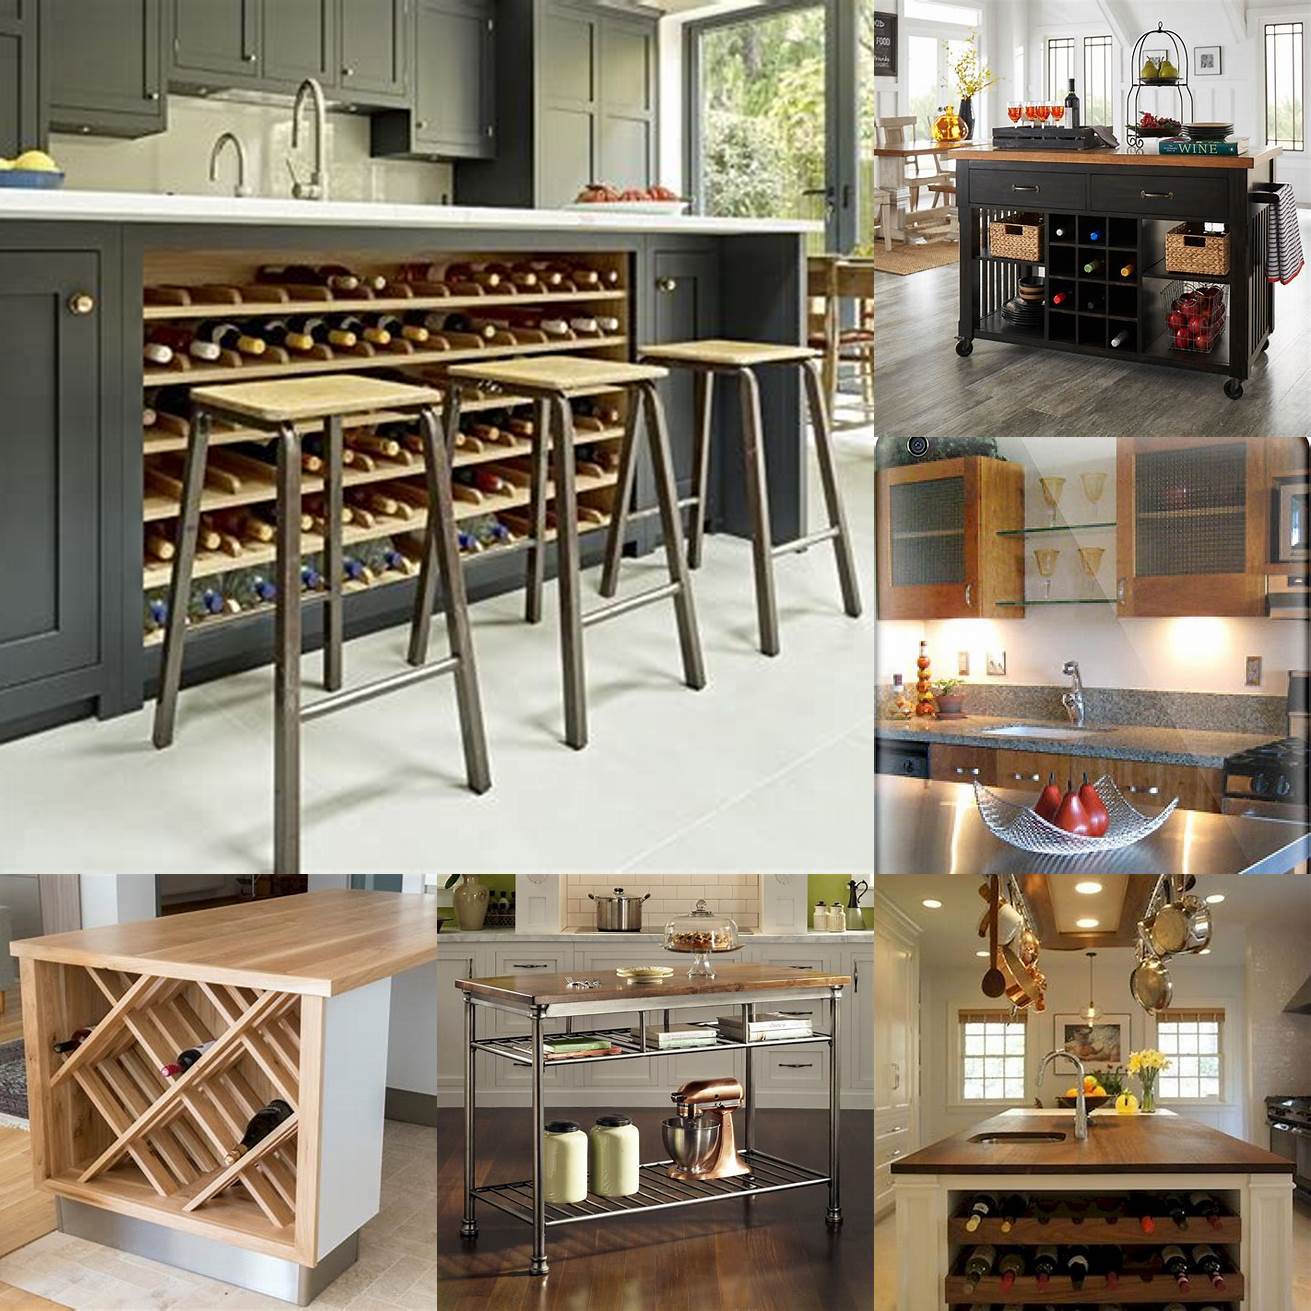 A stainless steel kitchen island with a wine rack